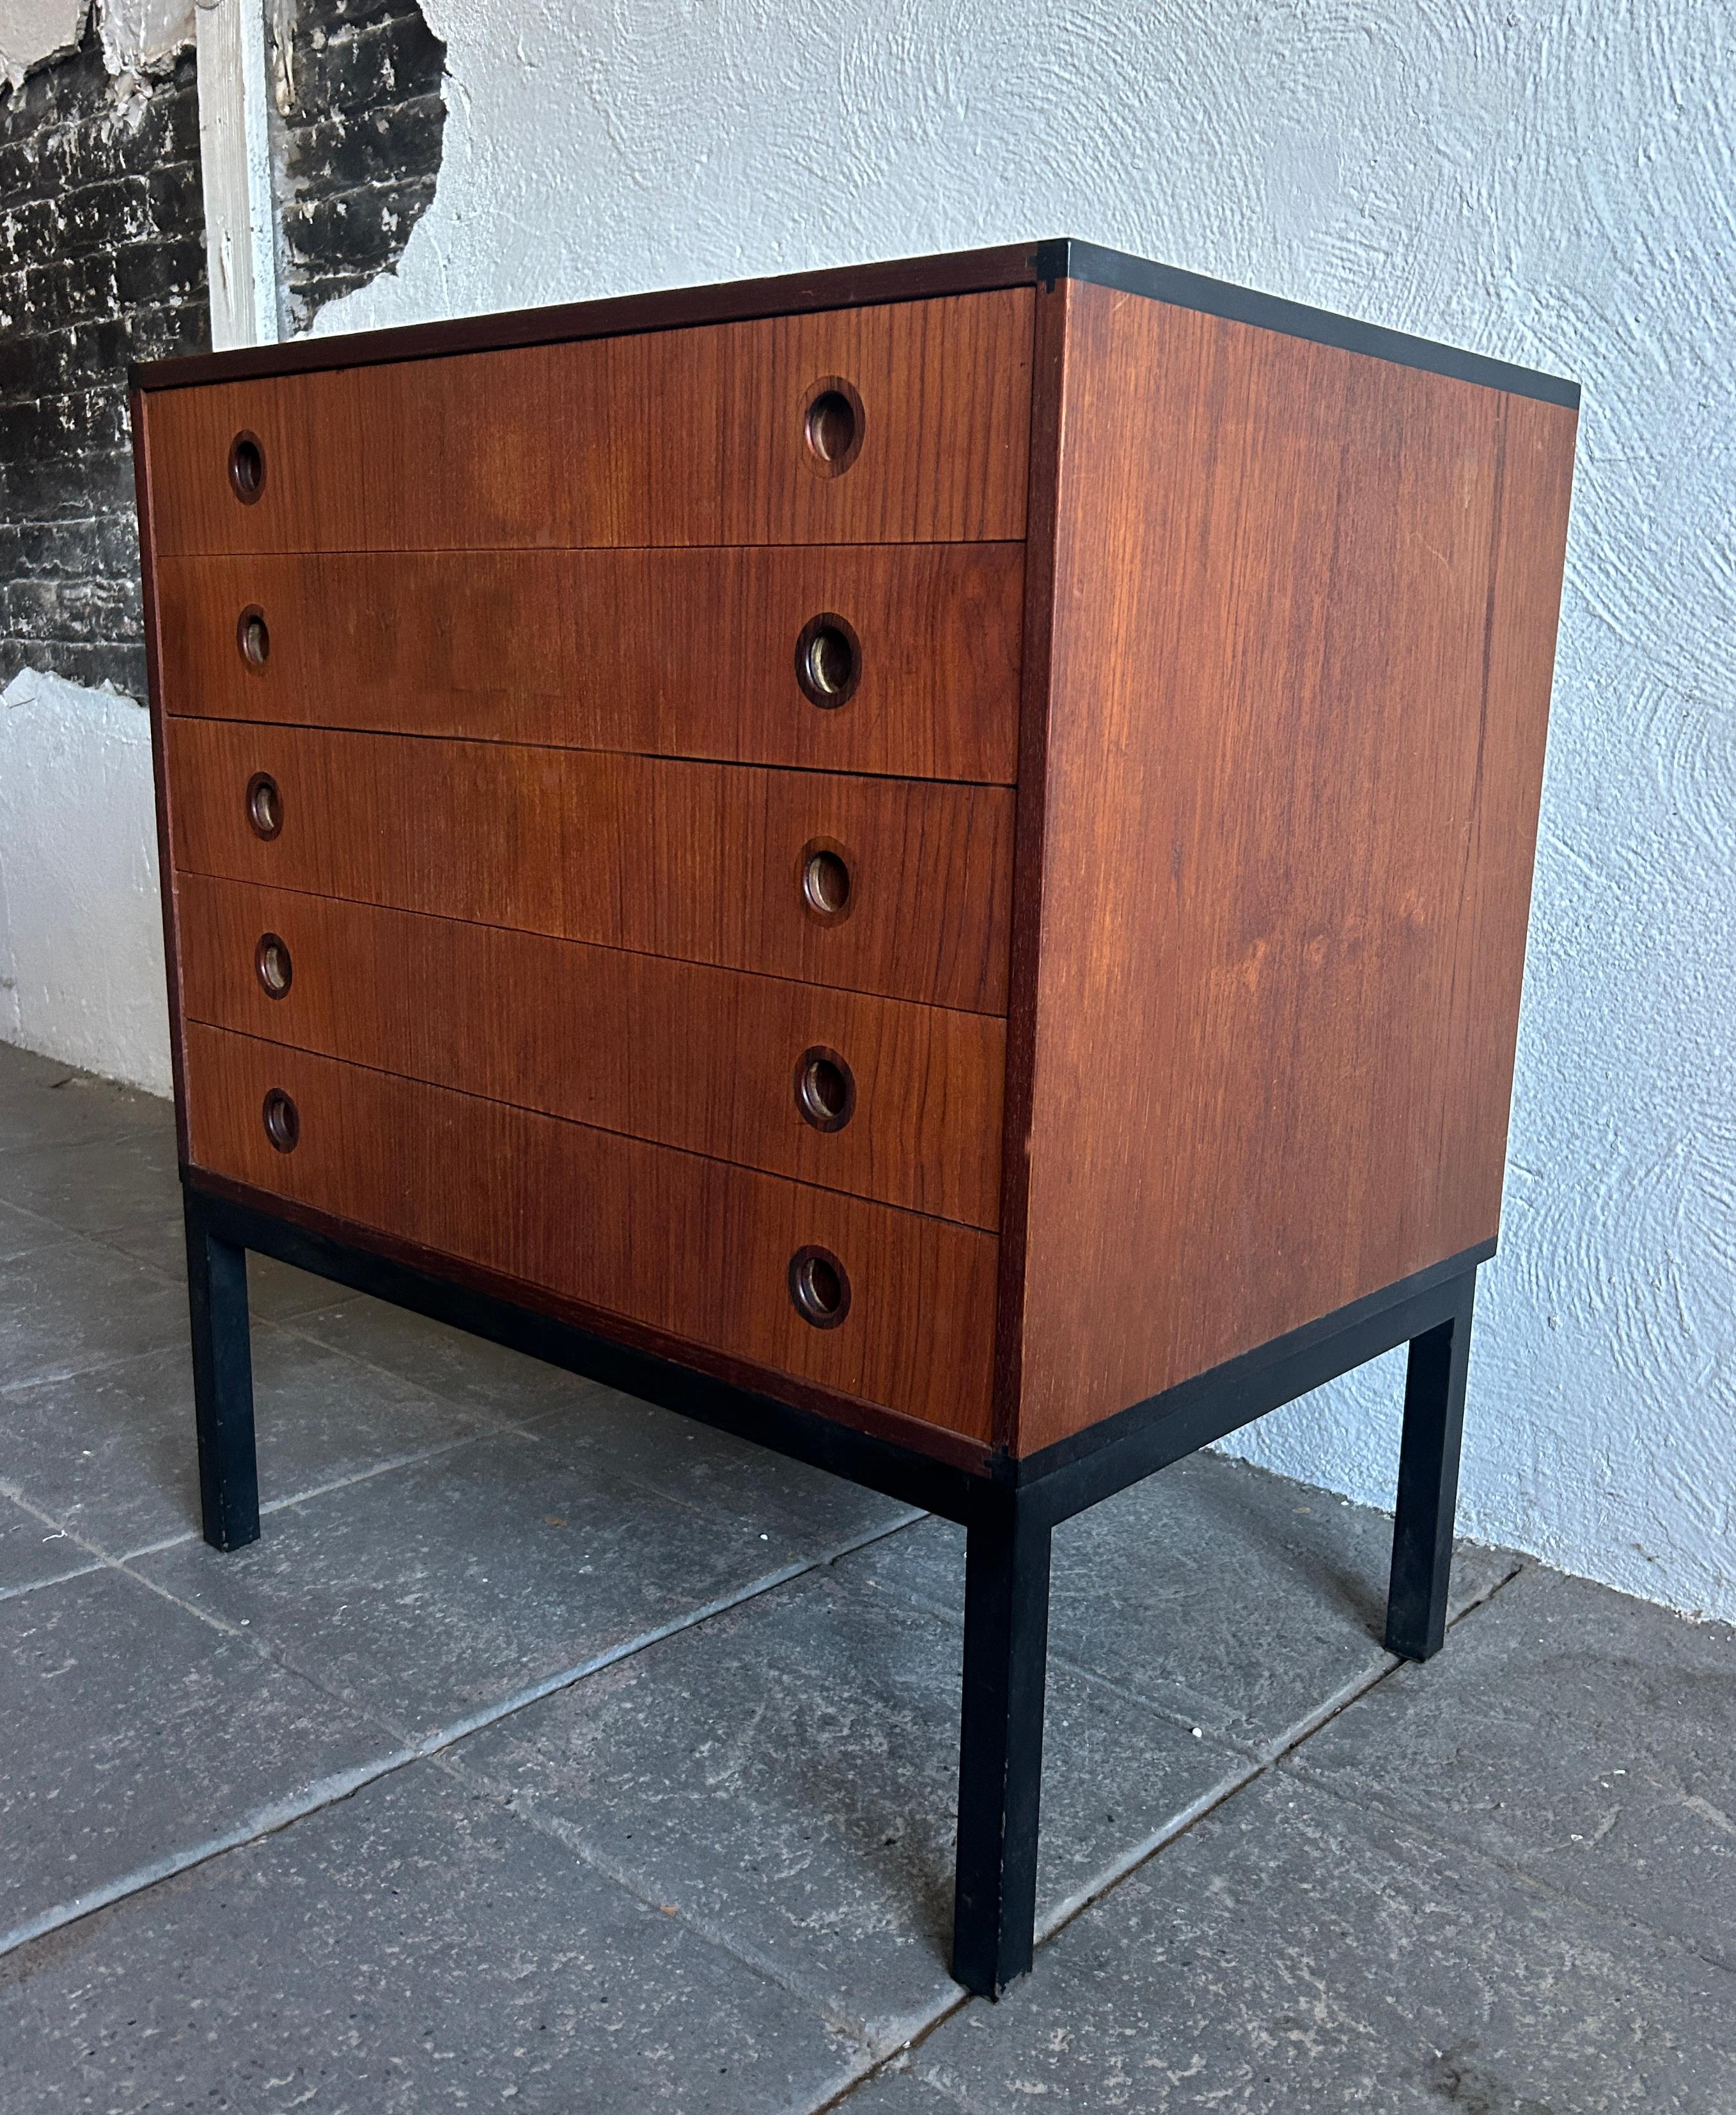 Danish modern Petite teak chest of drawers by Hans Hove & Palle Petersen Made by Christian Linnebergs mobler. Has 5 small sliding drawers made of solid birch blonde wood. Small End table or nightstand or chest of drawers. Teak wood with rosewood